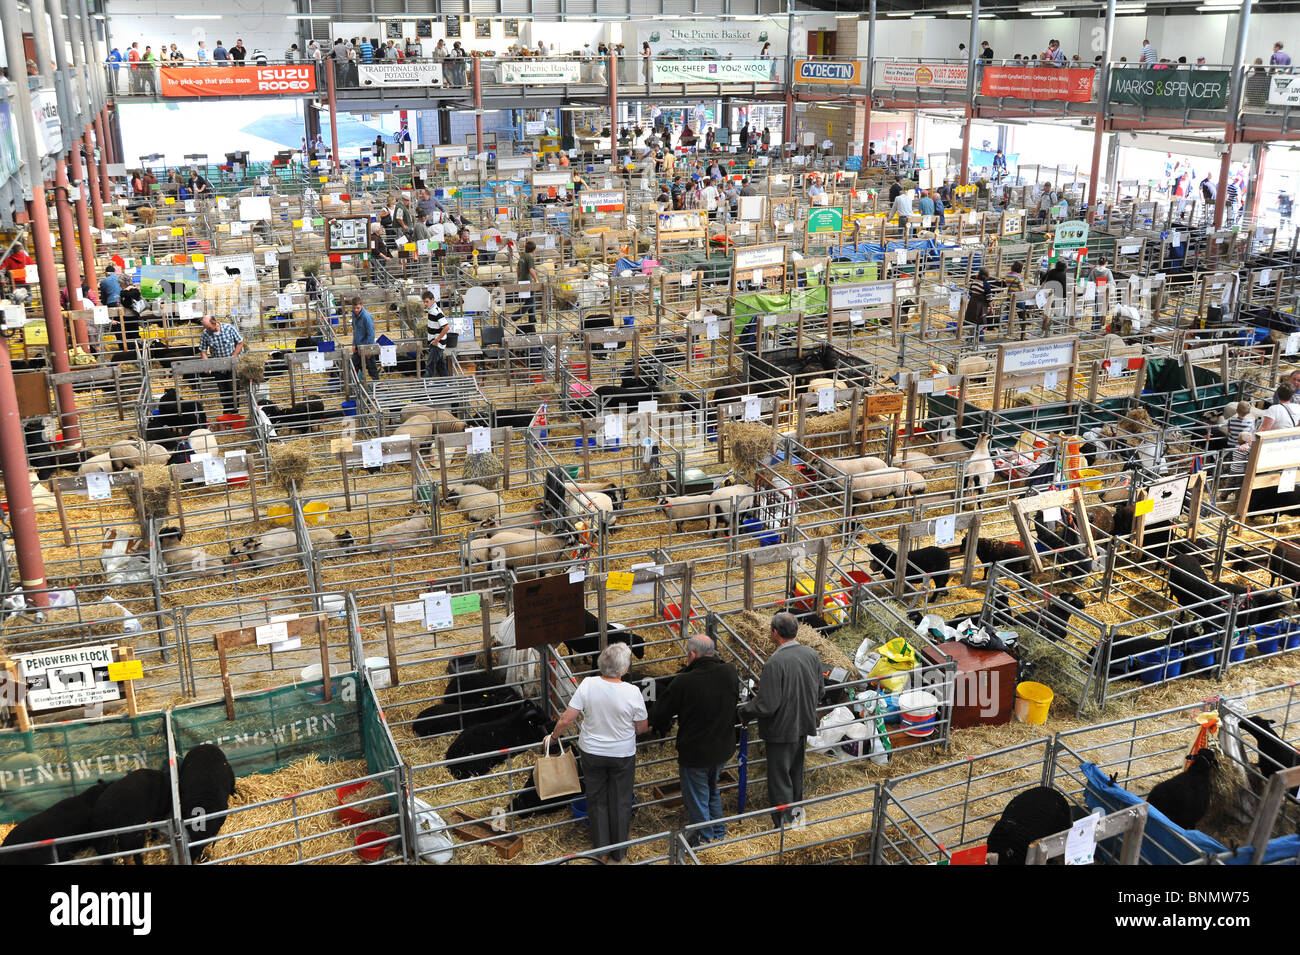 Royal Welsh Show 2010 indoor sheep lines and pens Stock Photo